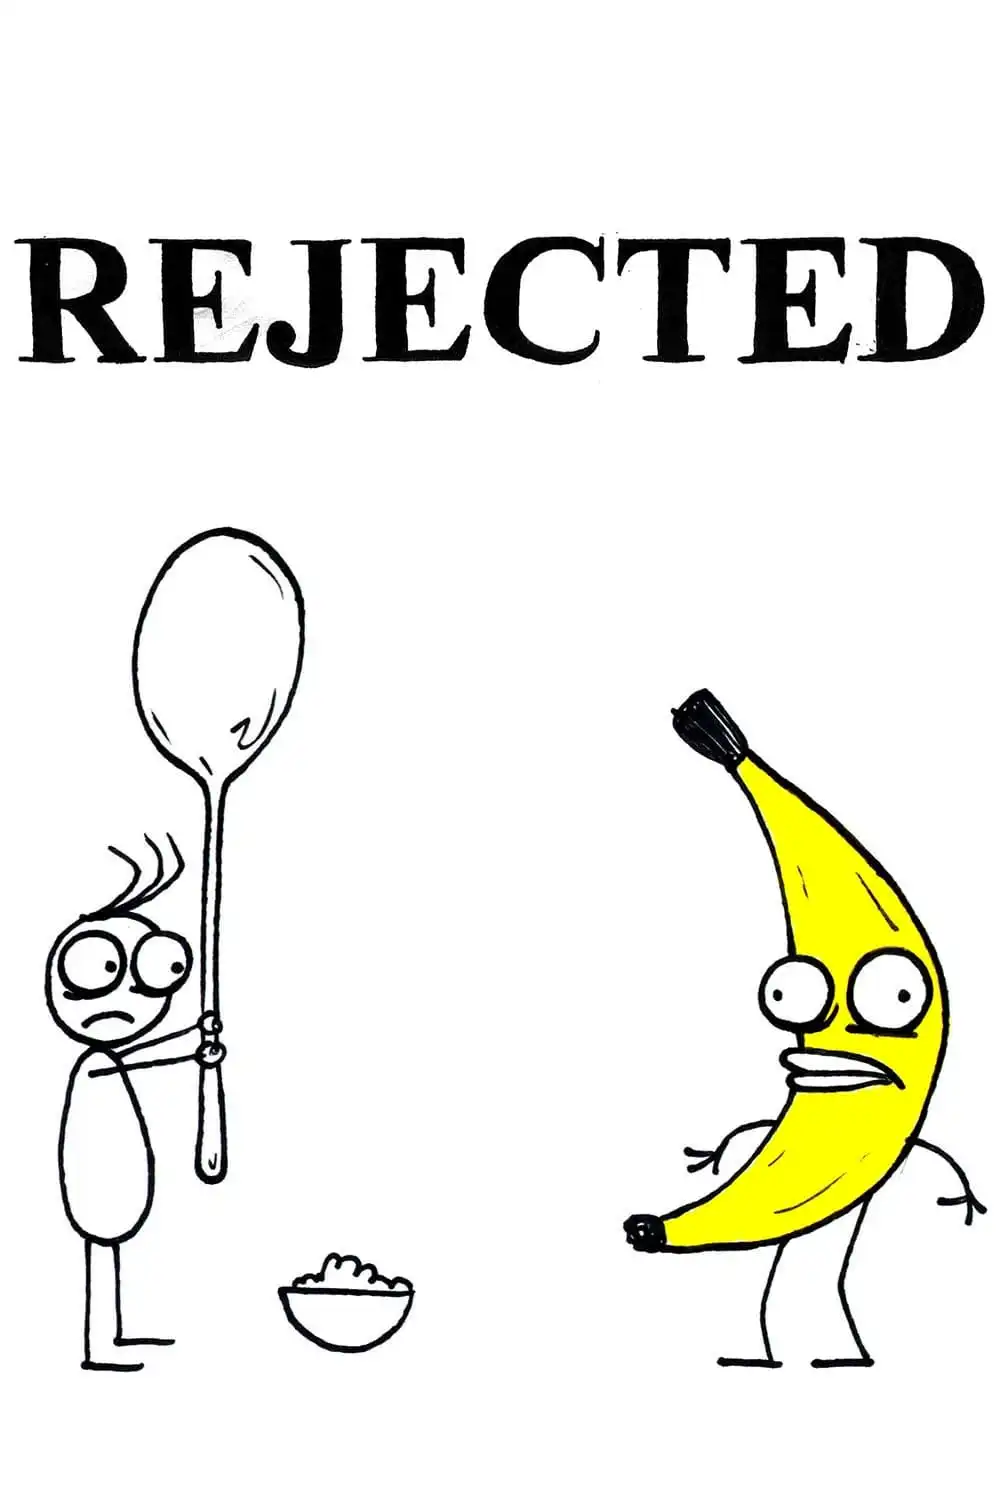 Watch and Download Rejected 9